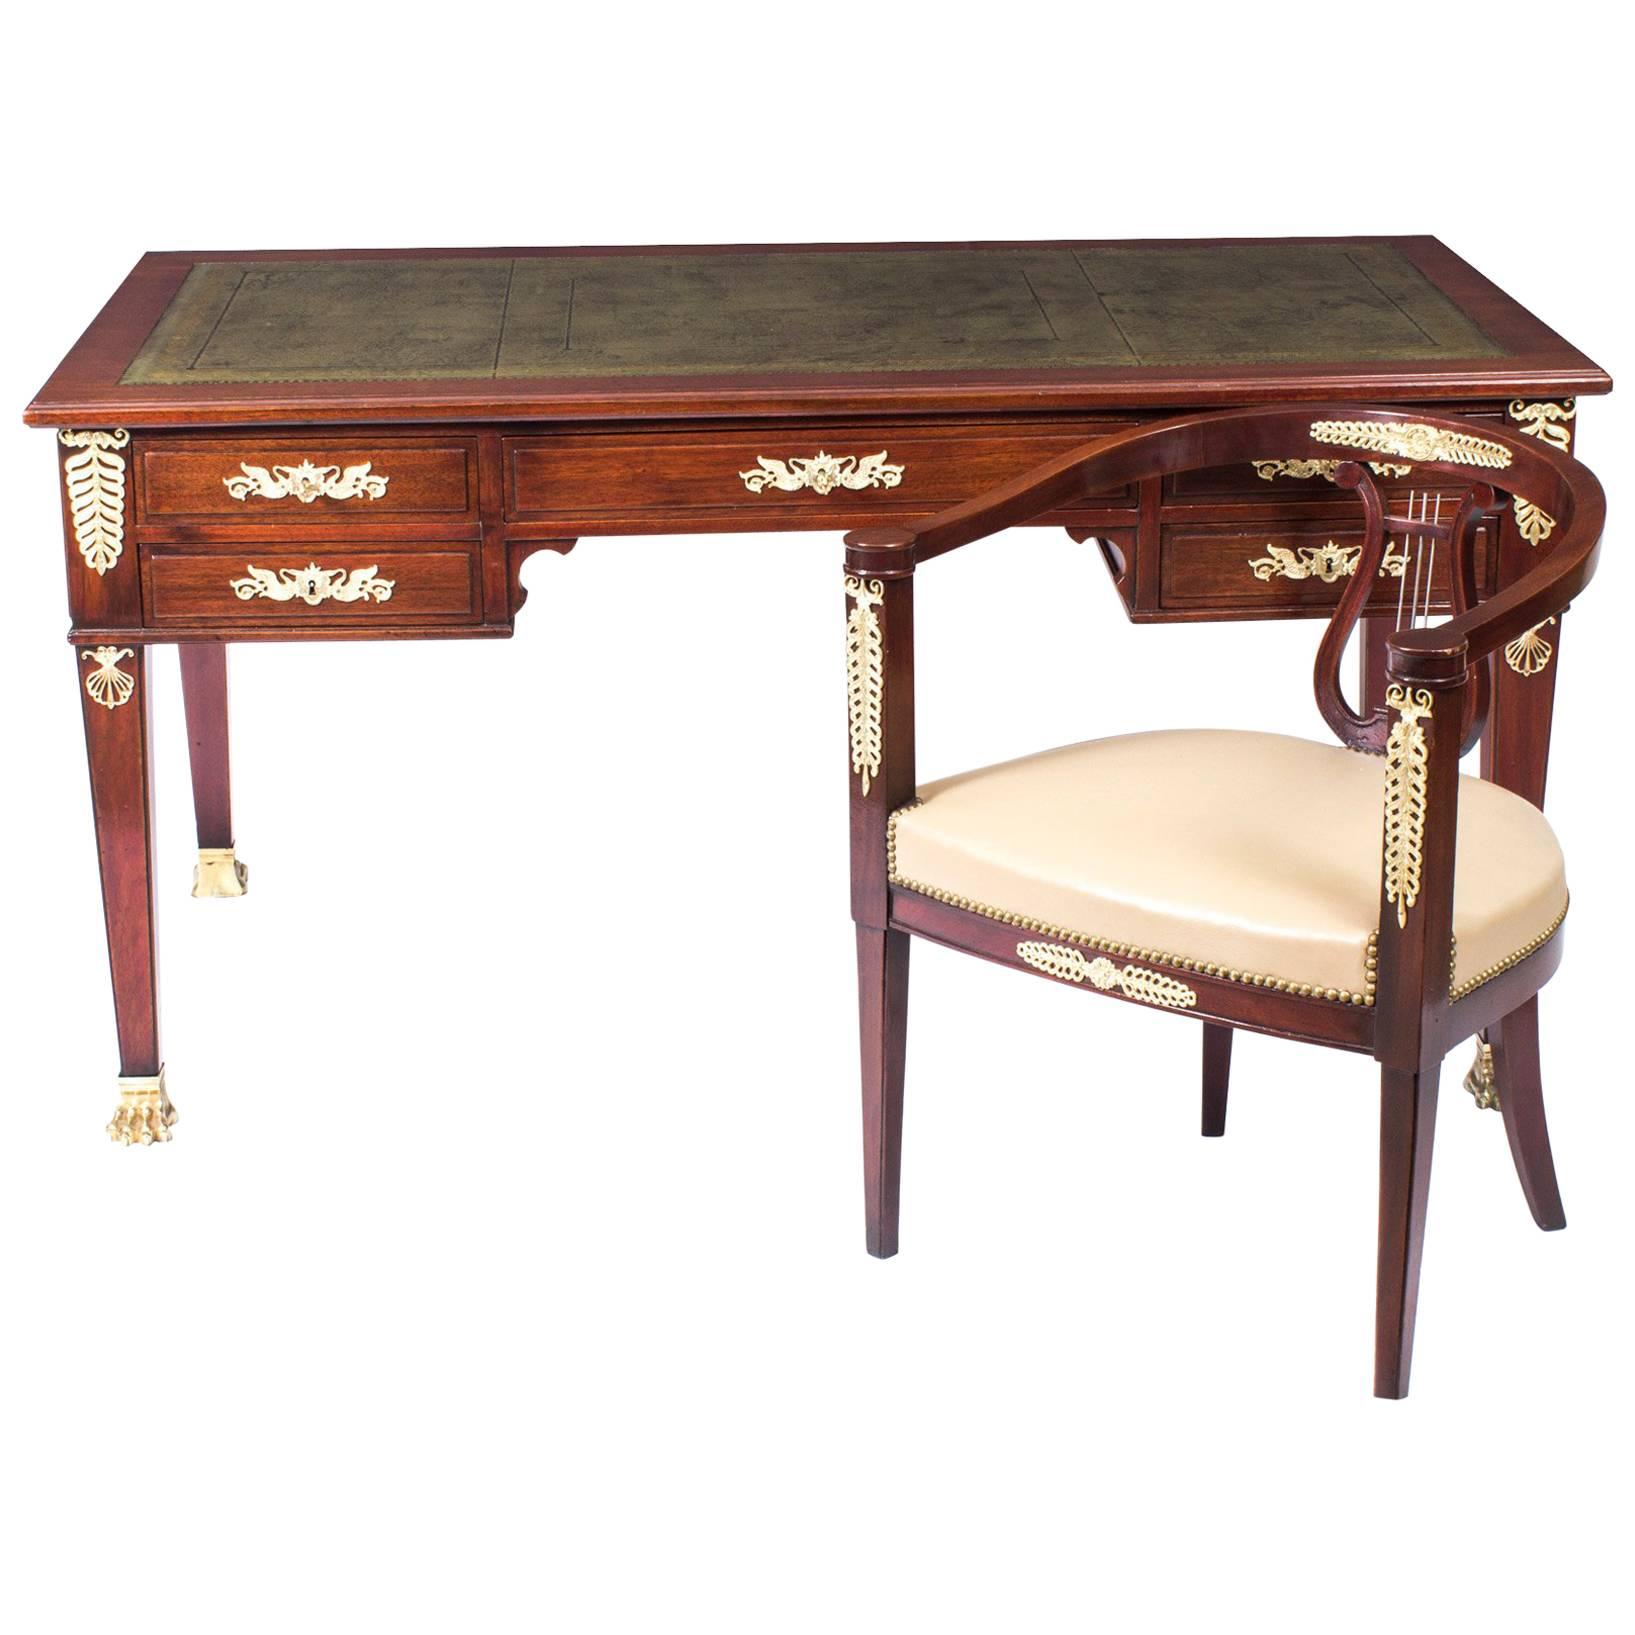 19th Century French Empire Ormolu Mounted Desk and Chair